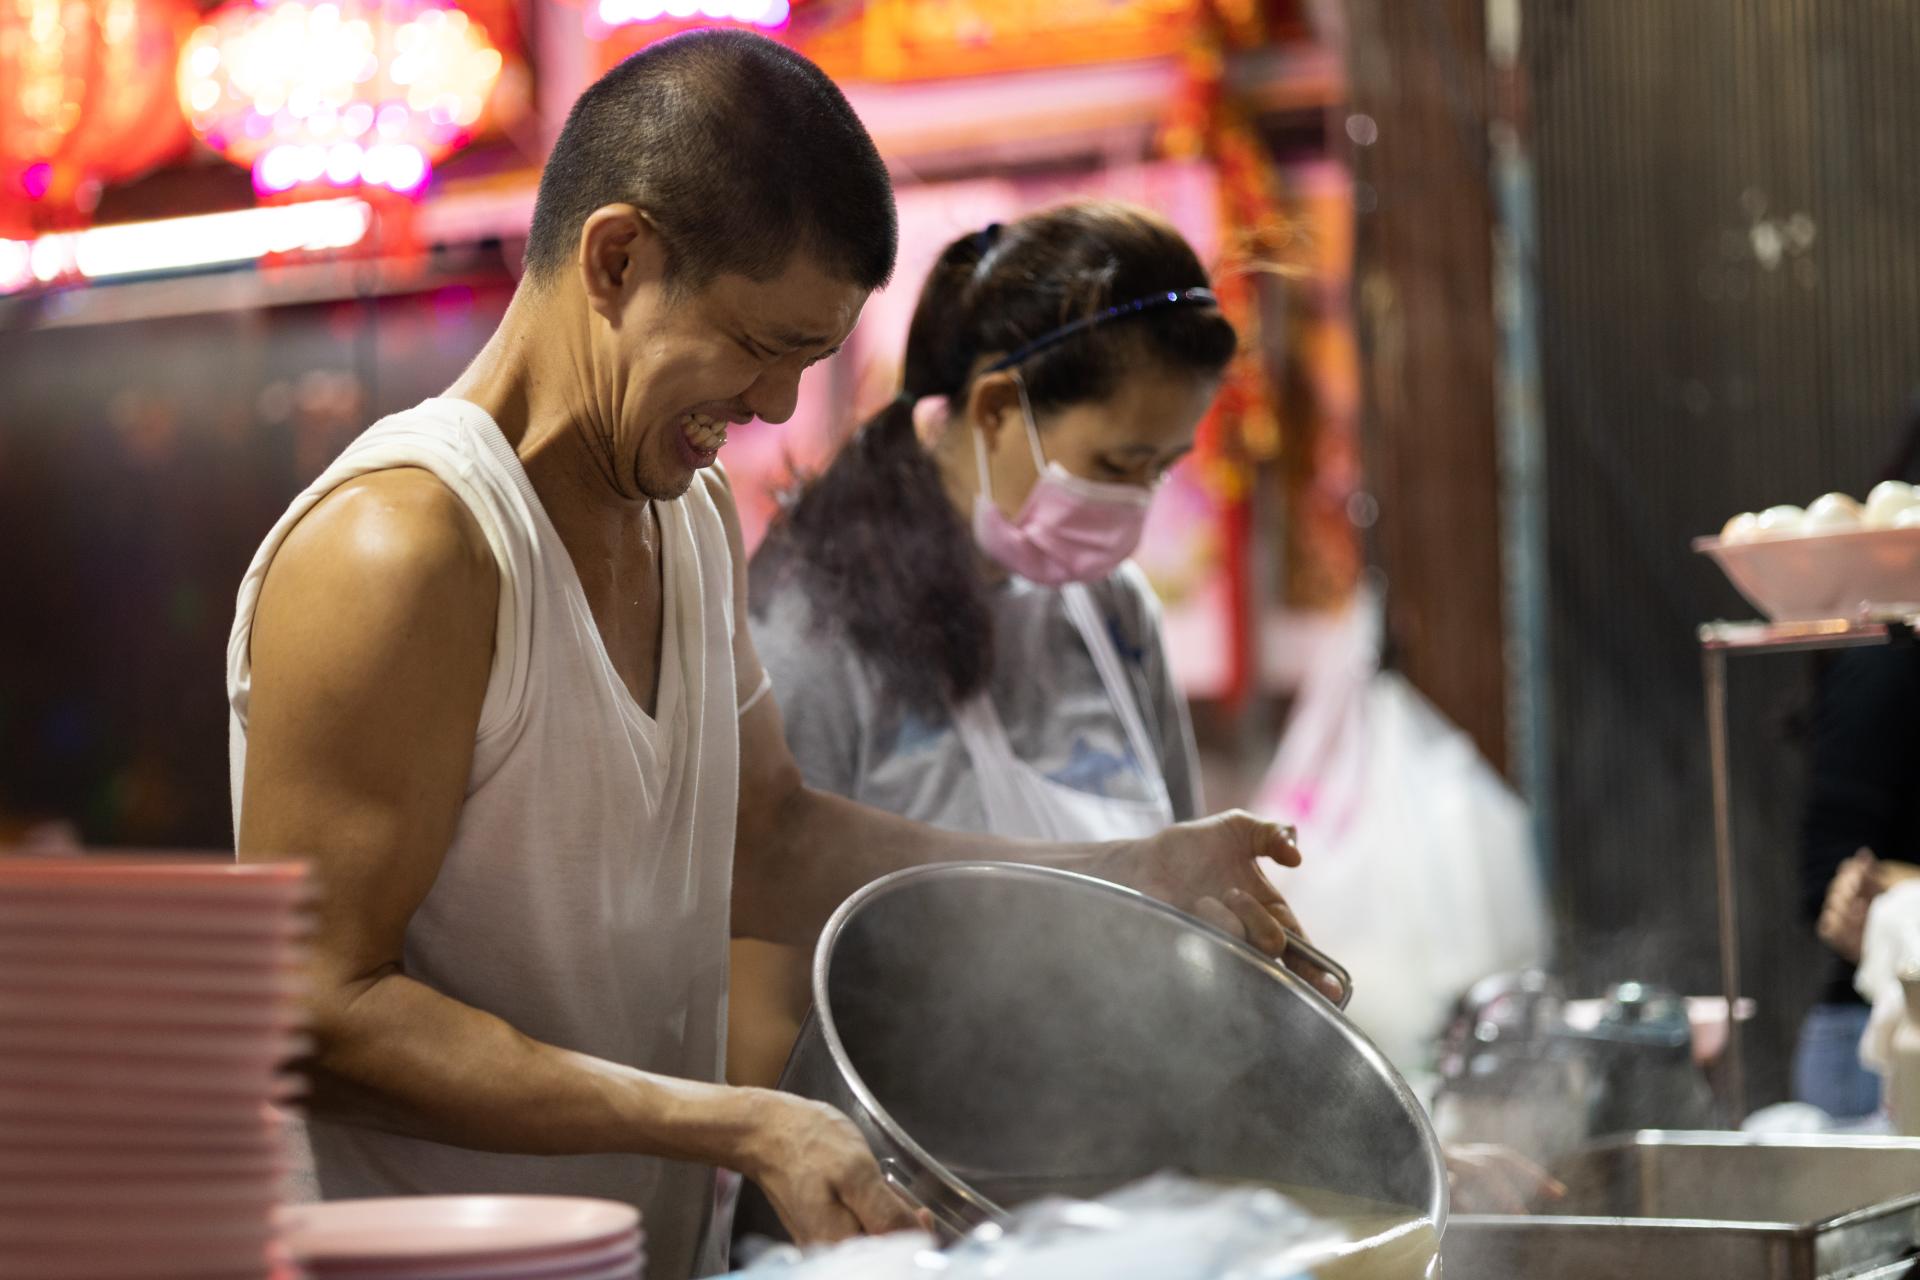 London Photography Awards Winner - A Journey into the Culture of Streetfood